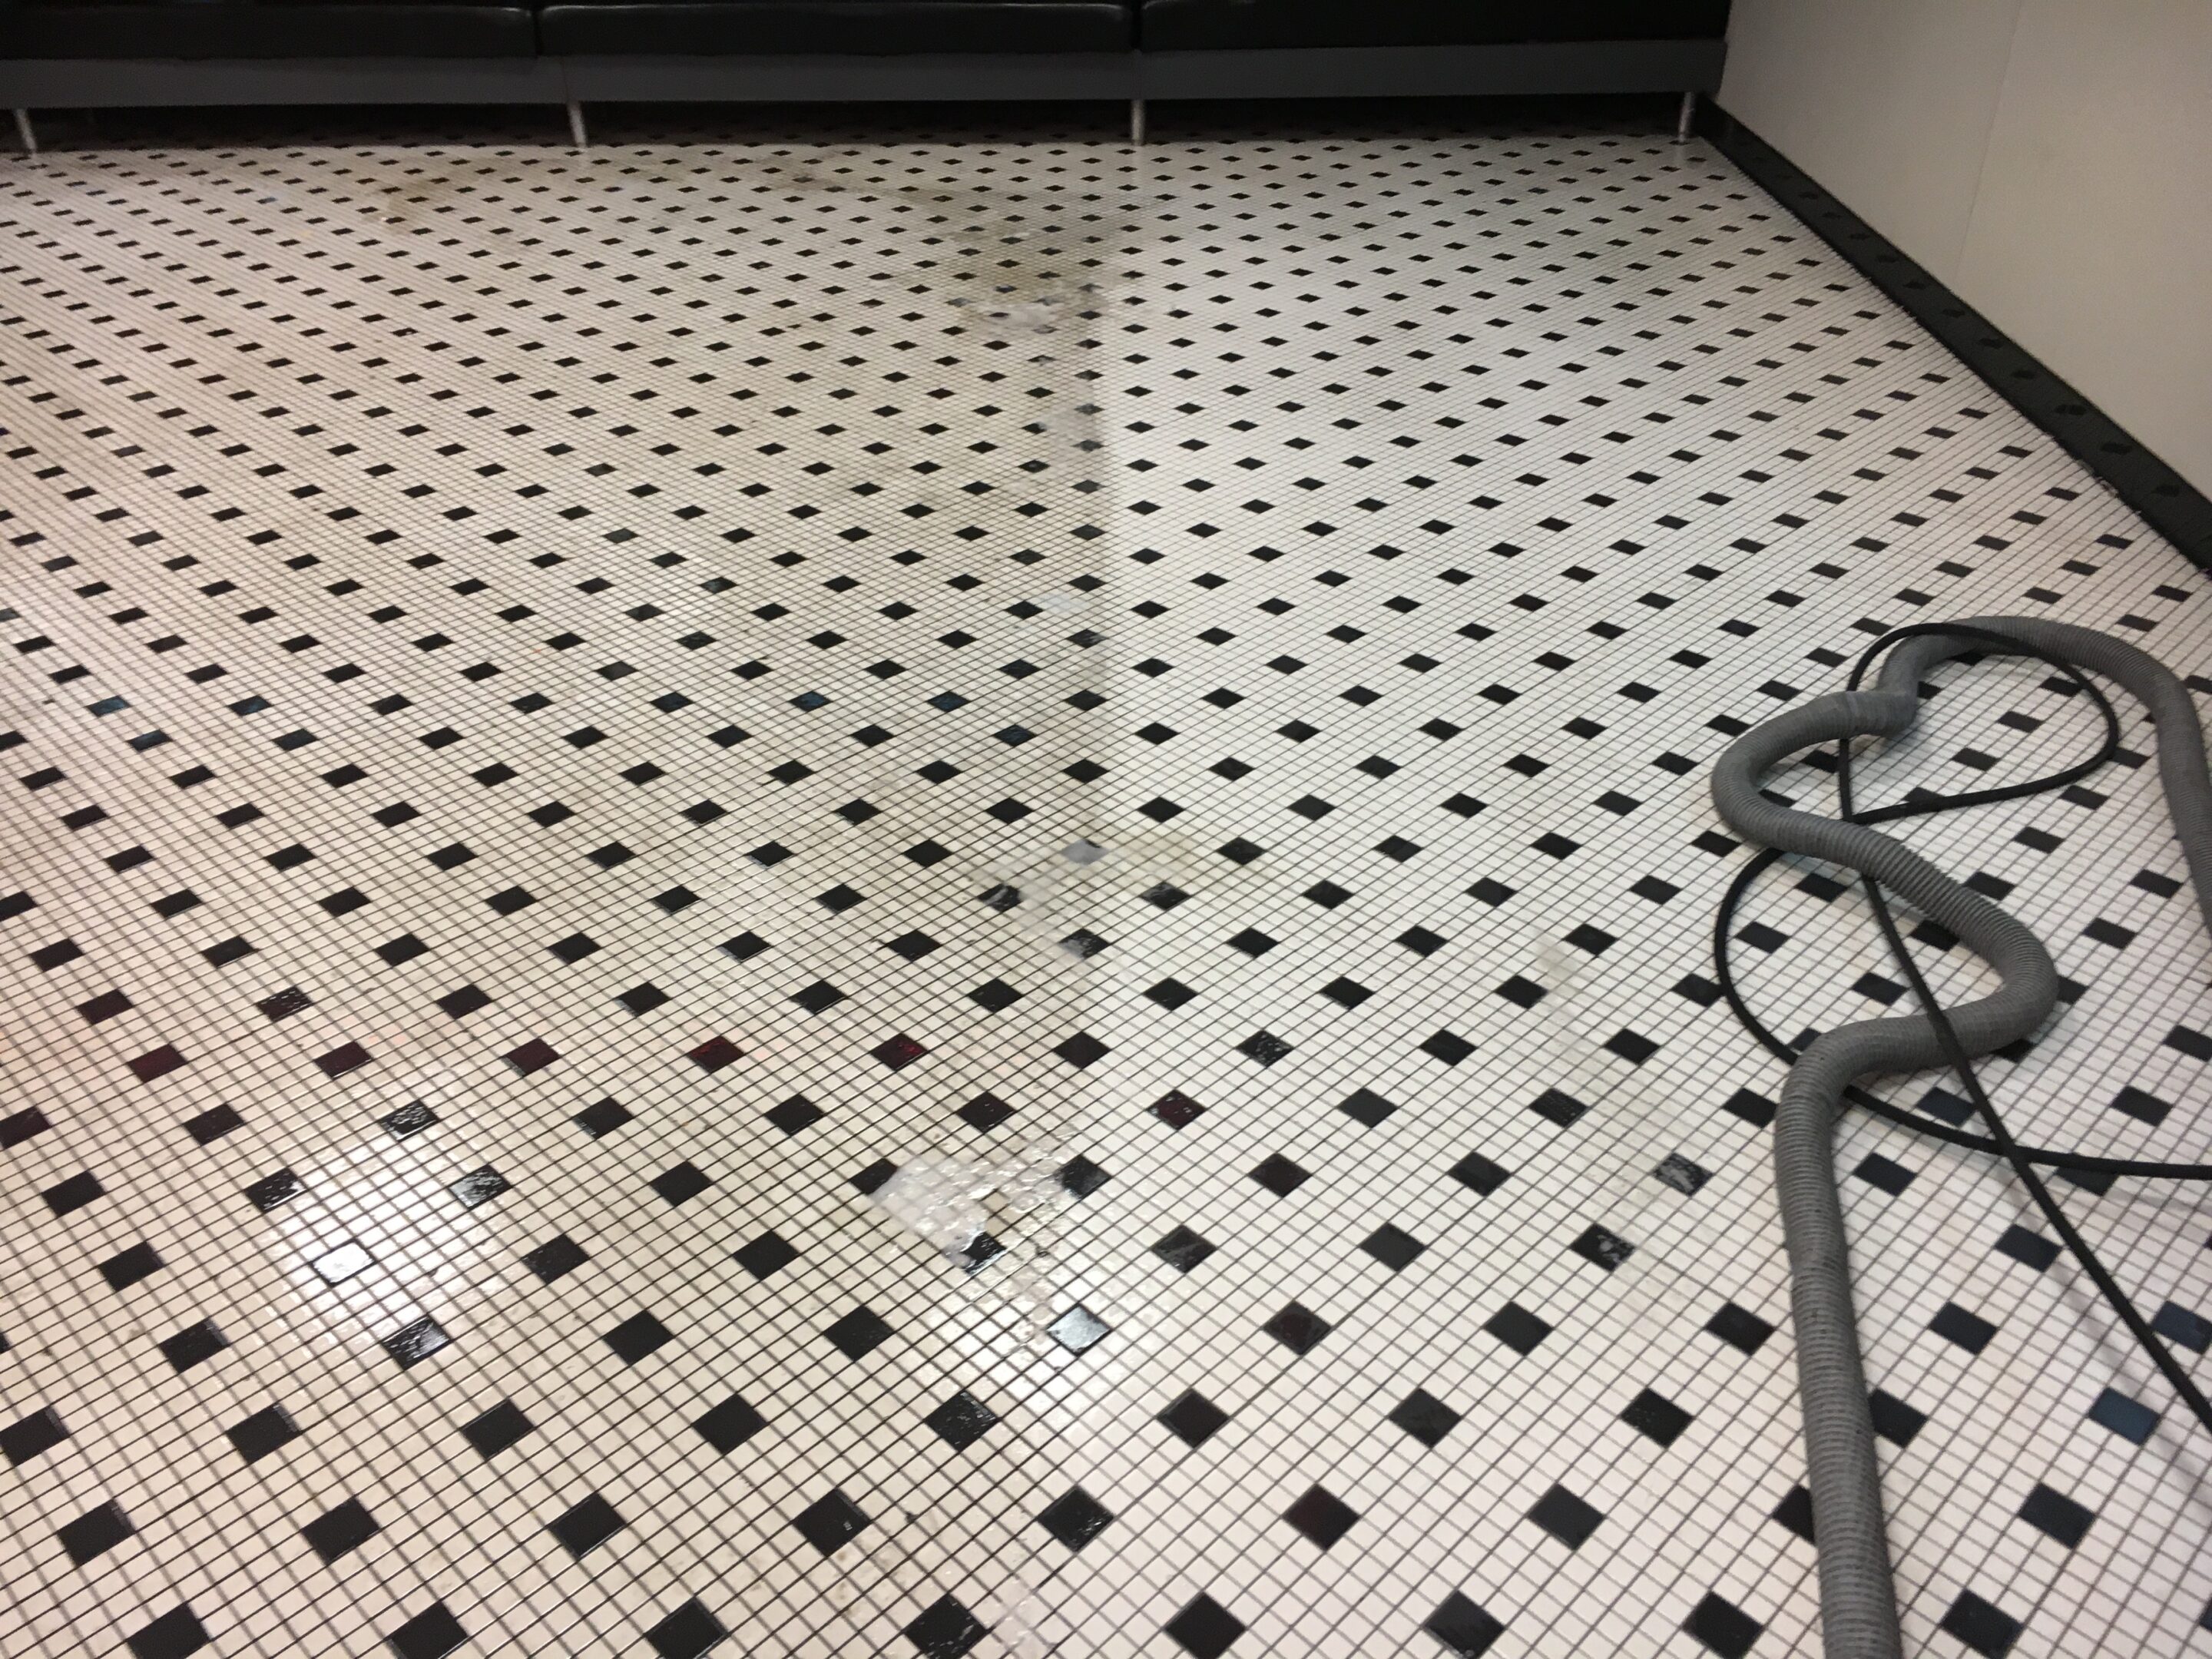 Tile and Grout Cleaning Chicago